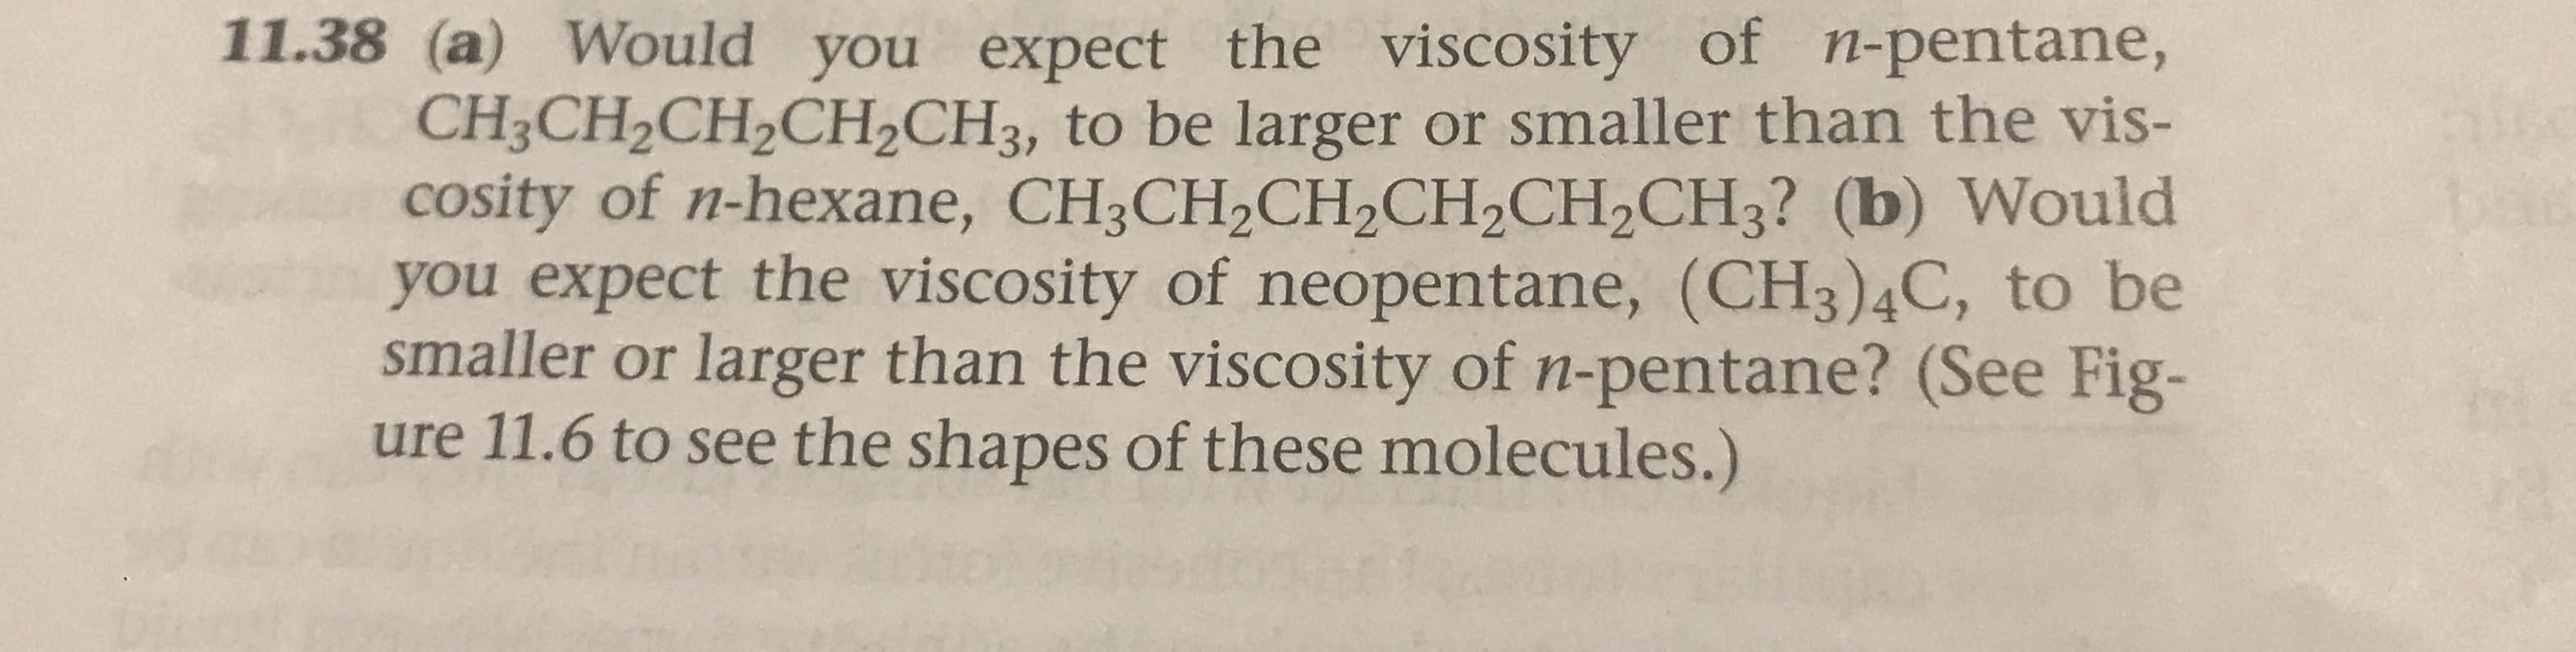 11.38 (a) Would you expect the viscosity of n-pentane,
CH3CH2CH2CH2CH3, to be larger or smaller than the vis-
cosity of n-hexane, CH3CH2CH2CH2CH2CH3? (b) Would
you expect the viscosity of neopentane, (CH3)4C, to be
smaller or larger than the viscosity of n-pentane? (See Fig-
ure 11.6 to see the shapes of these molecules.)
